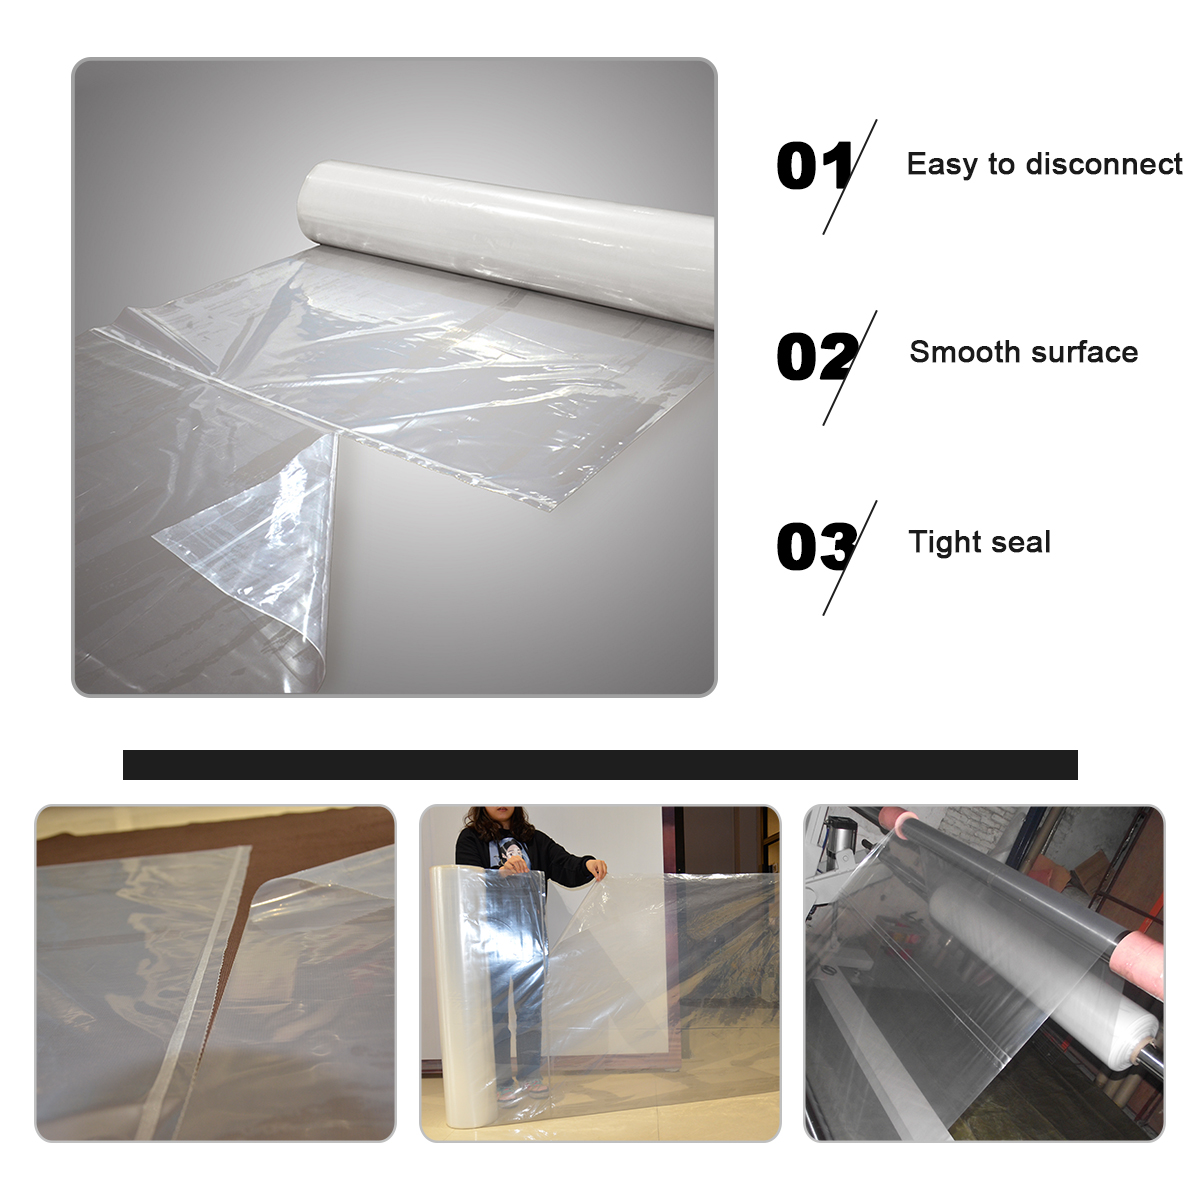 Clear plastic bags on roll